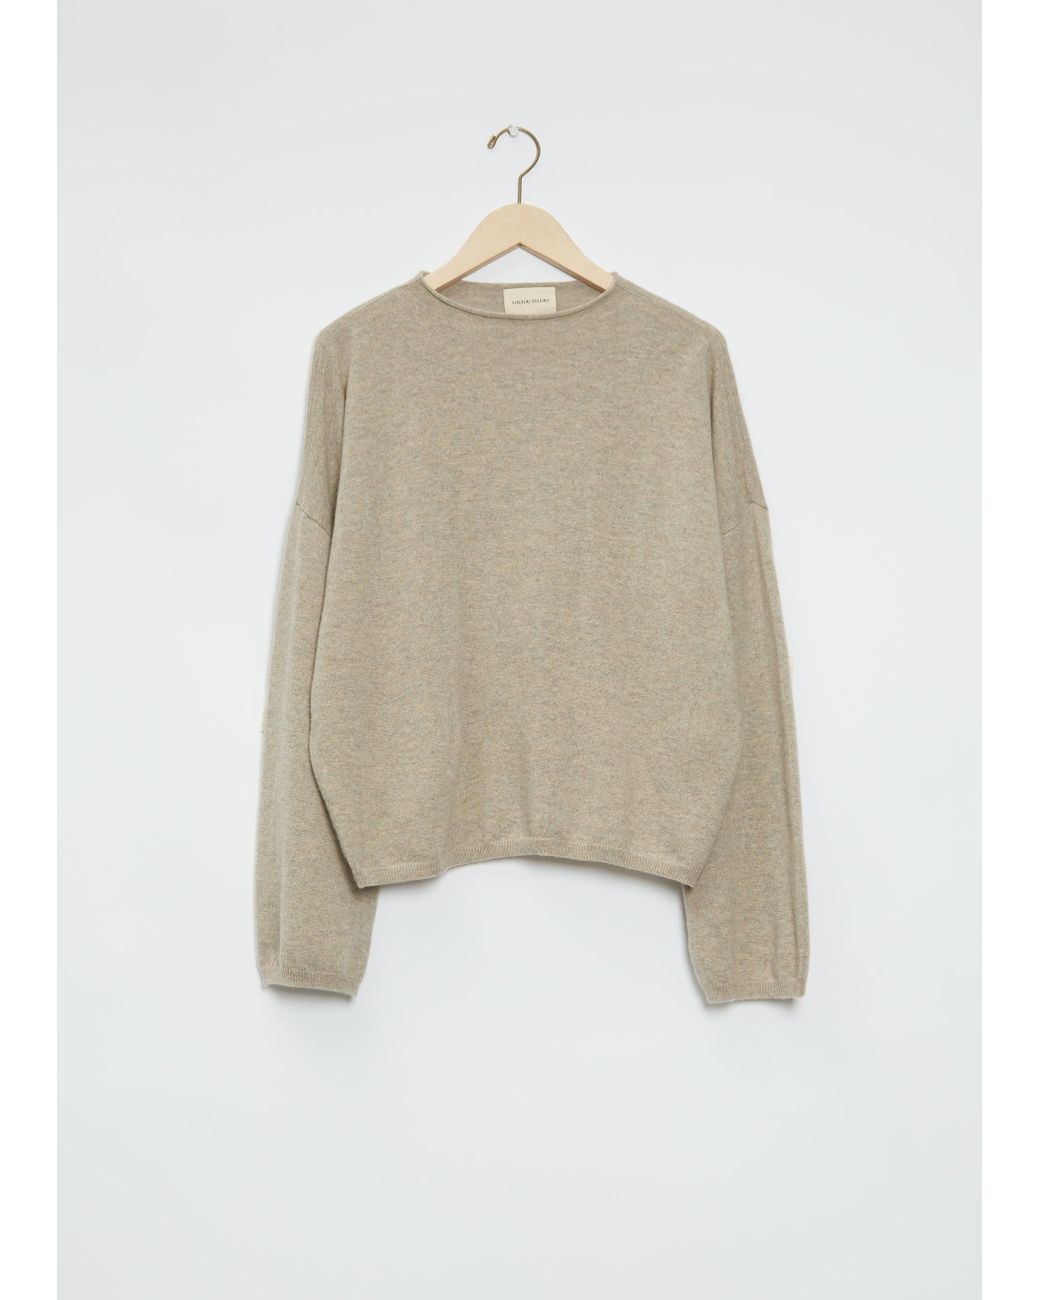 Loulou Studio Vacca Cashmere Sweater in Natural | Lyst